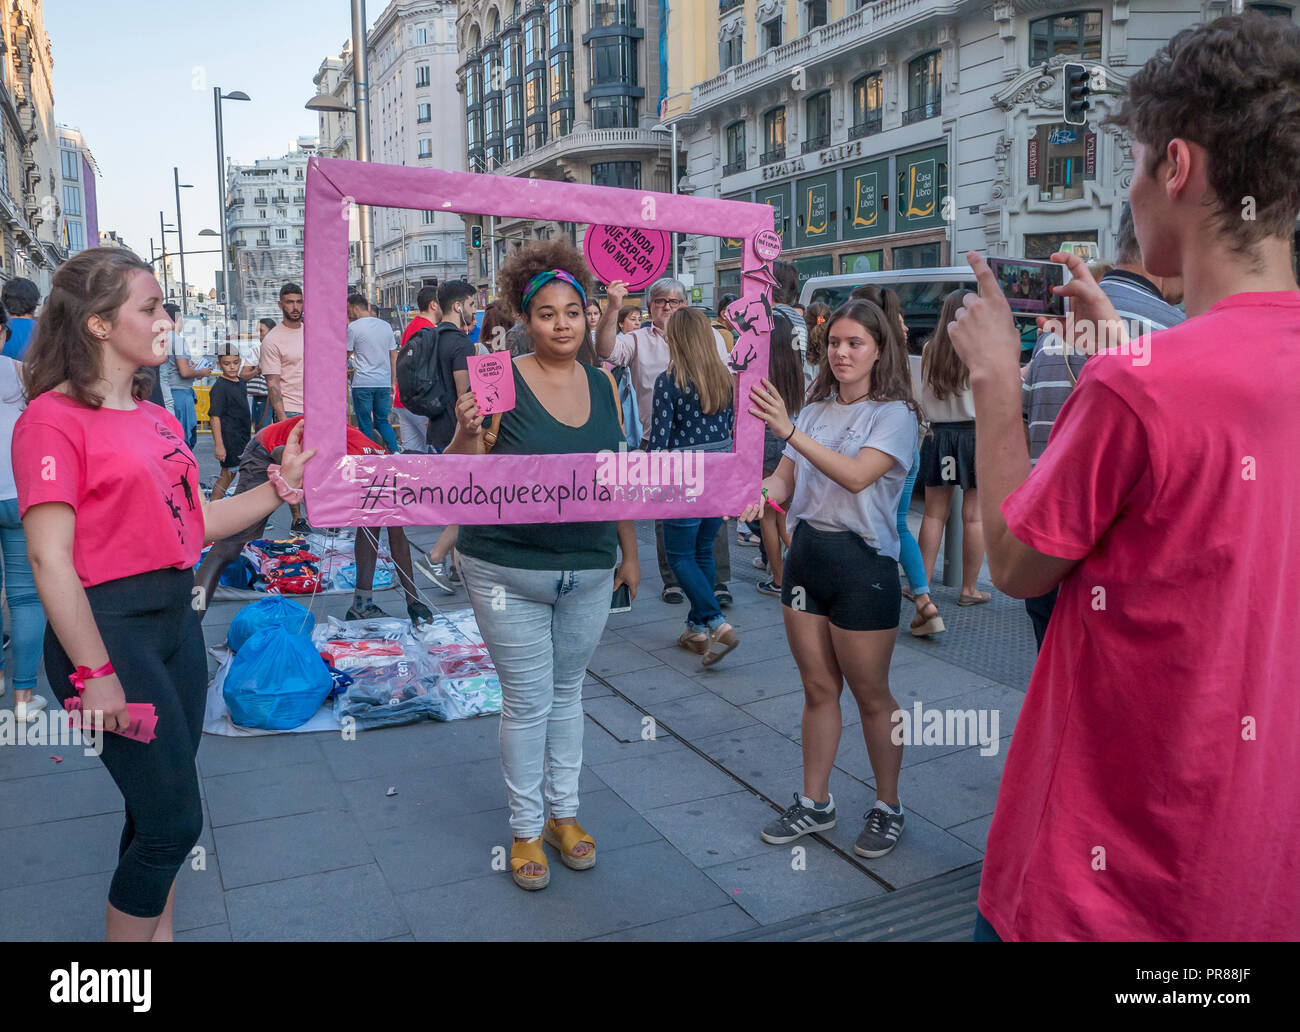 Madrid, Spain. 30 September 2018. A protest action against slavery in fashion industry took place in Gran Vía, the main street of Madrid, consisting of creating awareness around the explotation of people in fashion factories. The organizators gave passers by pink baloons to explode in front of the main comercial shops of the street. Credit: Lora Grigorova/Alamy Live News Stock Photo